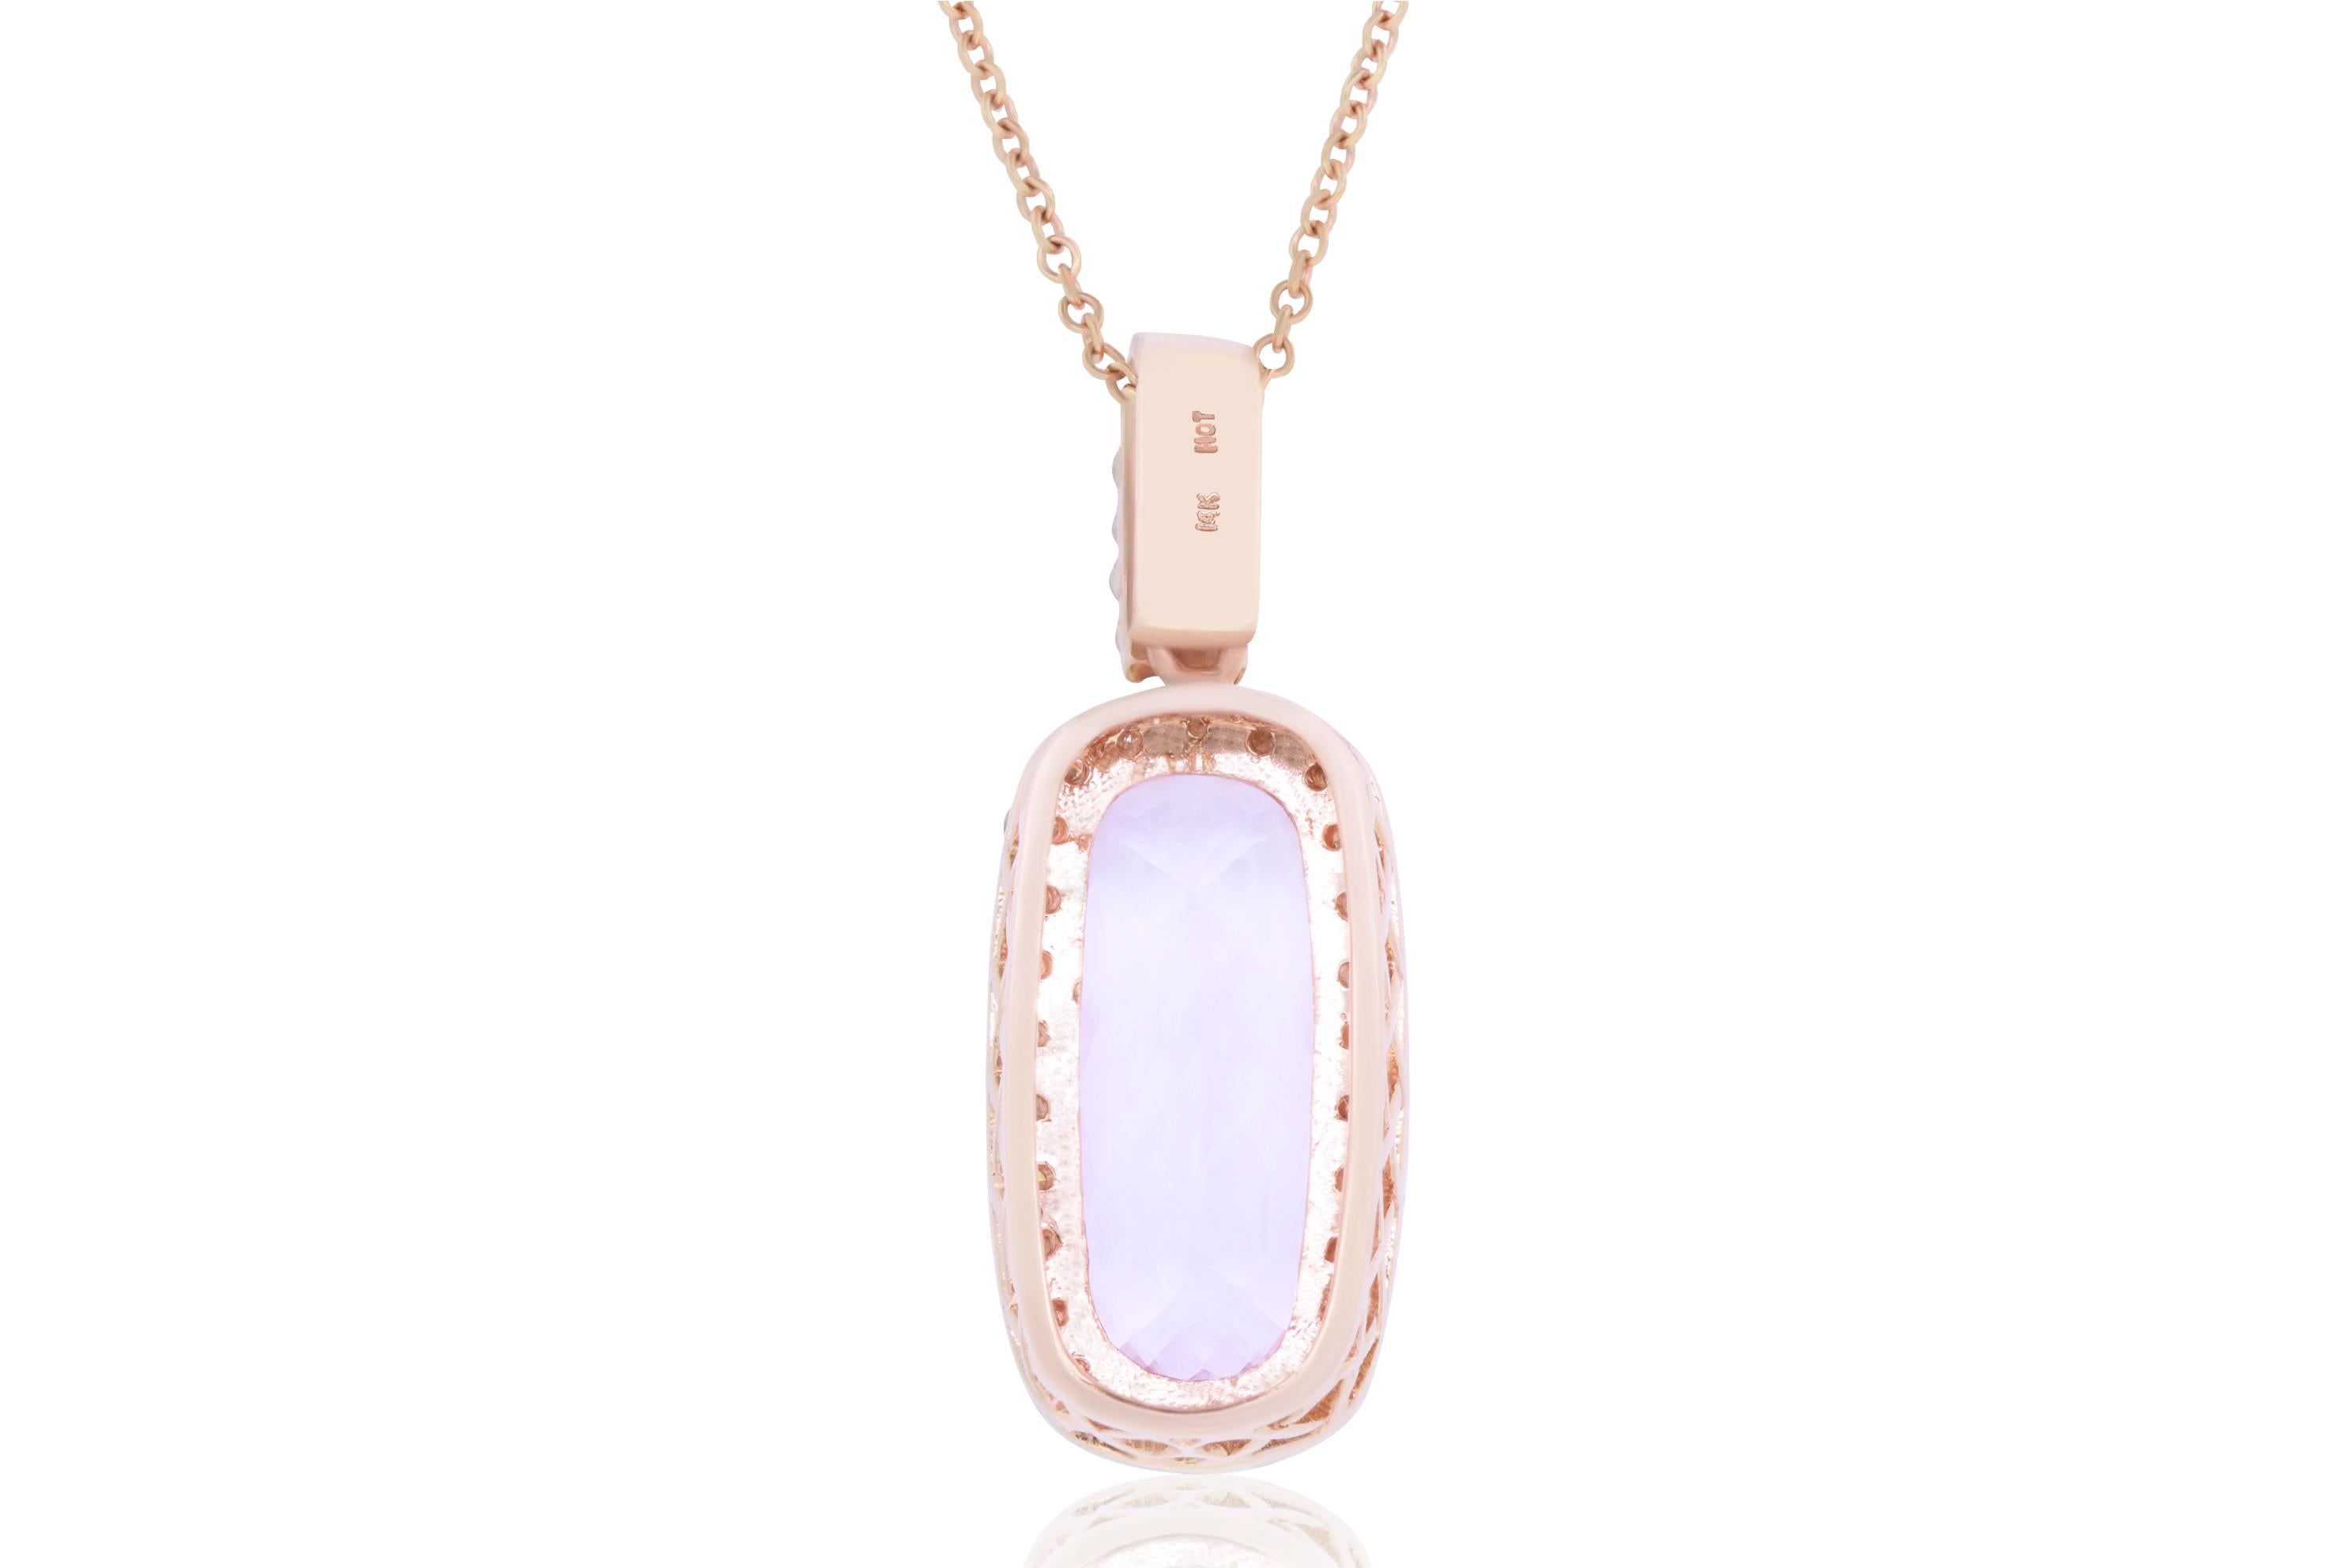 Material: 14k Rose Gold 
Center Stone Details:  16.10 Carat Cushion Cut Kunzite measuring 22.2 x 11.9 mm 
Mounting Diamond Details: 36 Brilliant Round White Diamonds Approximately 1.40 Carats - Clarity: SI / Color: H-I
Chain Length:  16 Inches

Fine